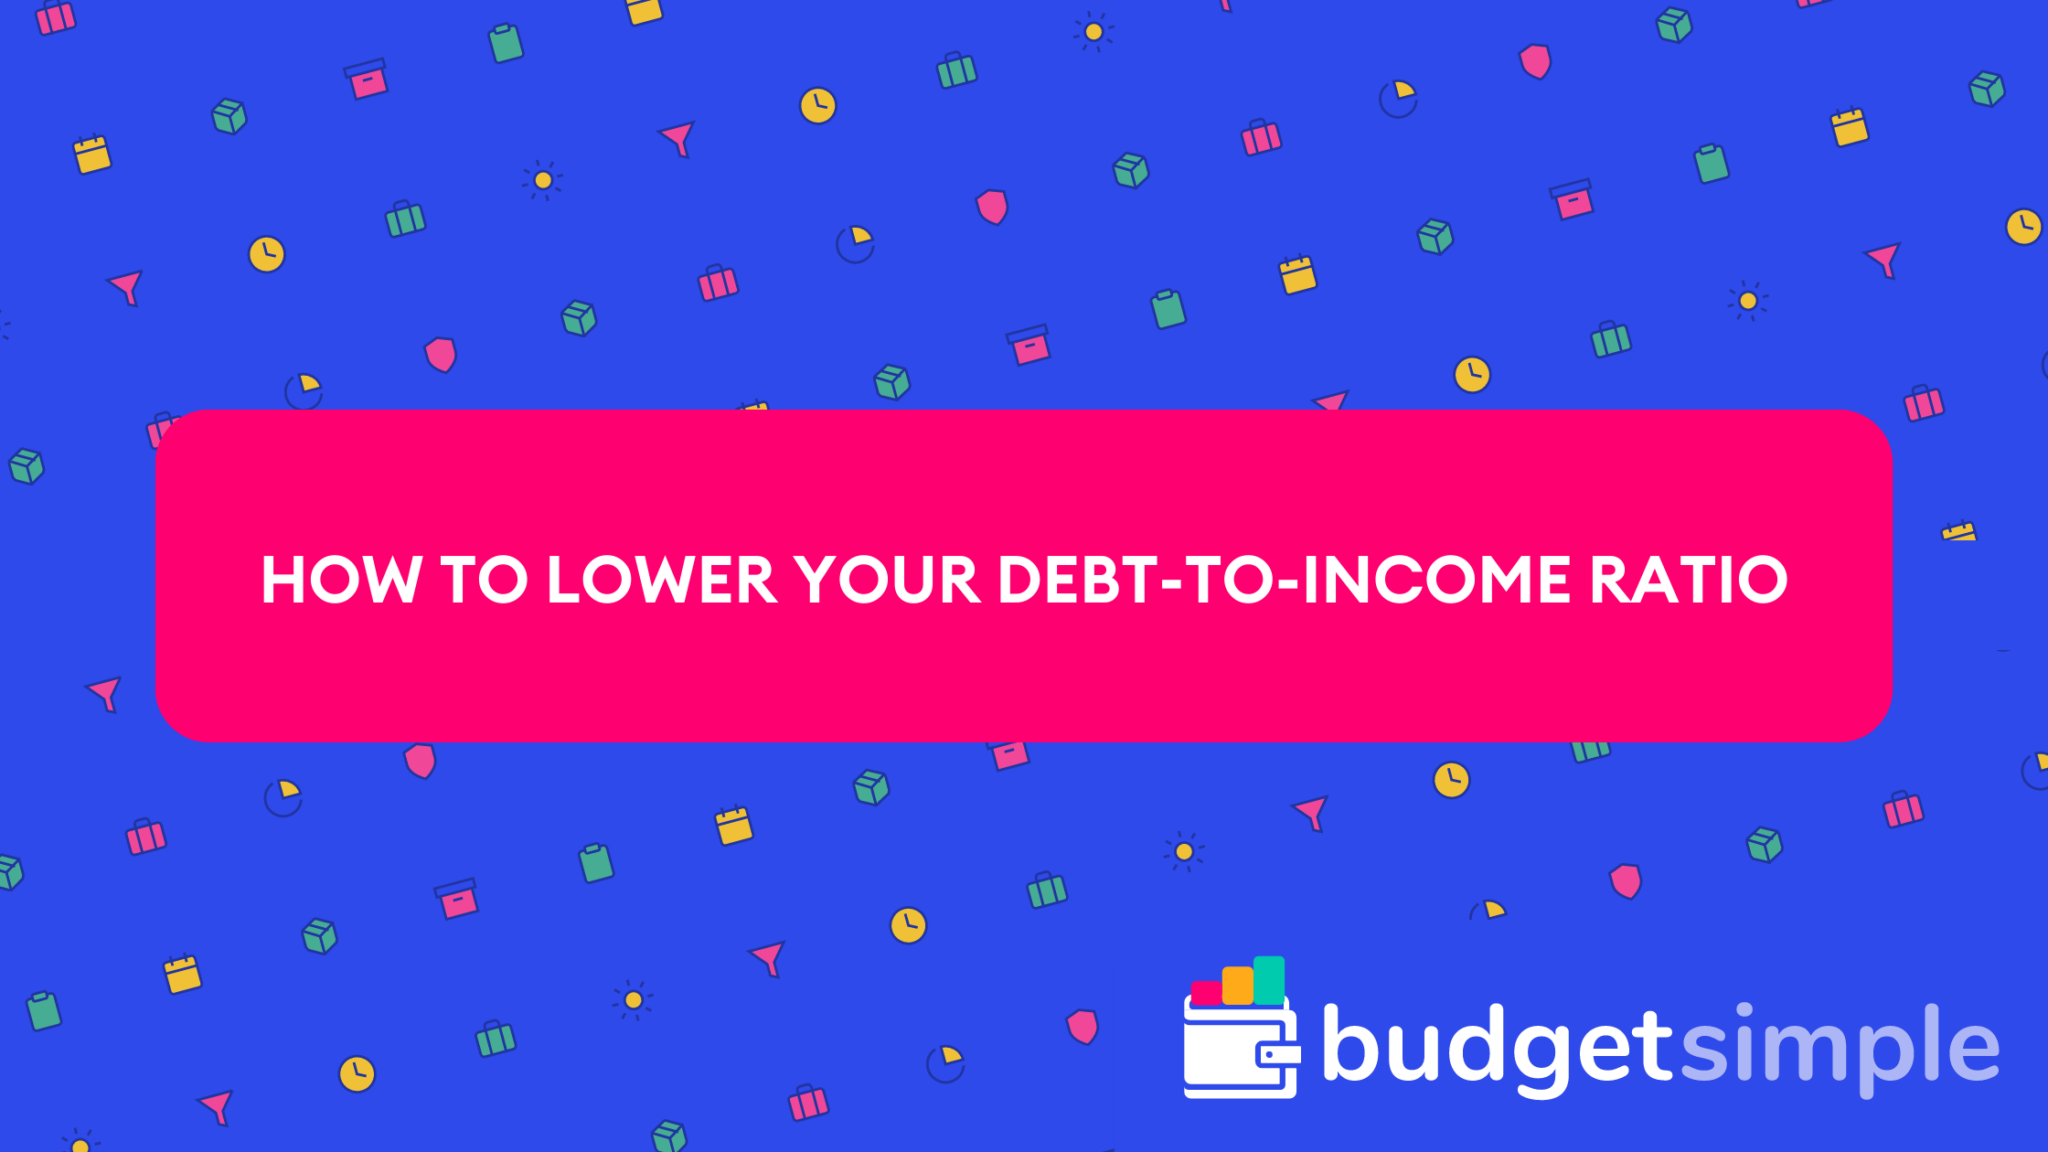 budgetsimple-how-to-lower-your-debt-to-income-ratio